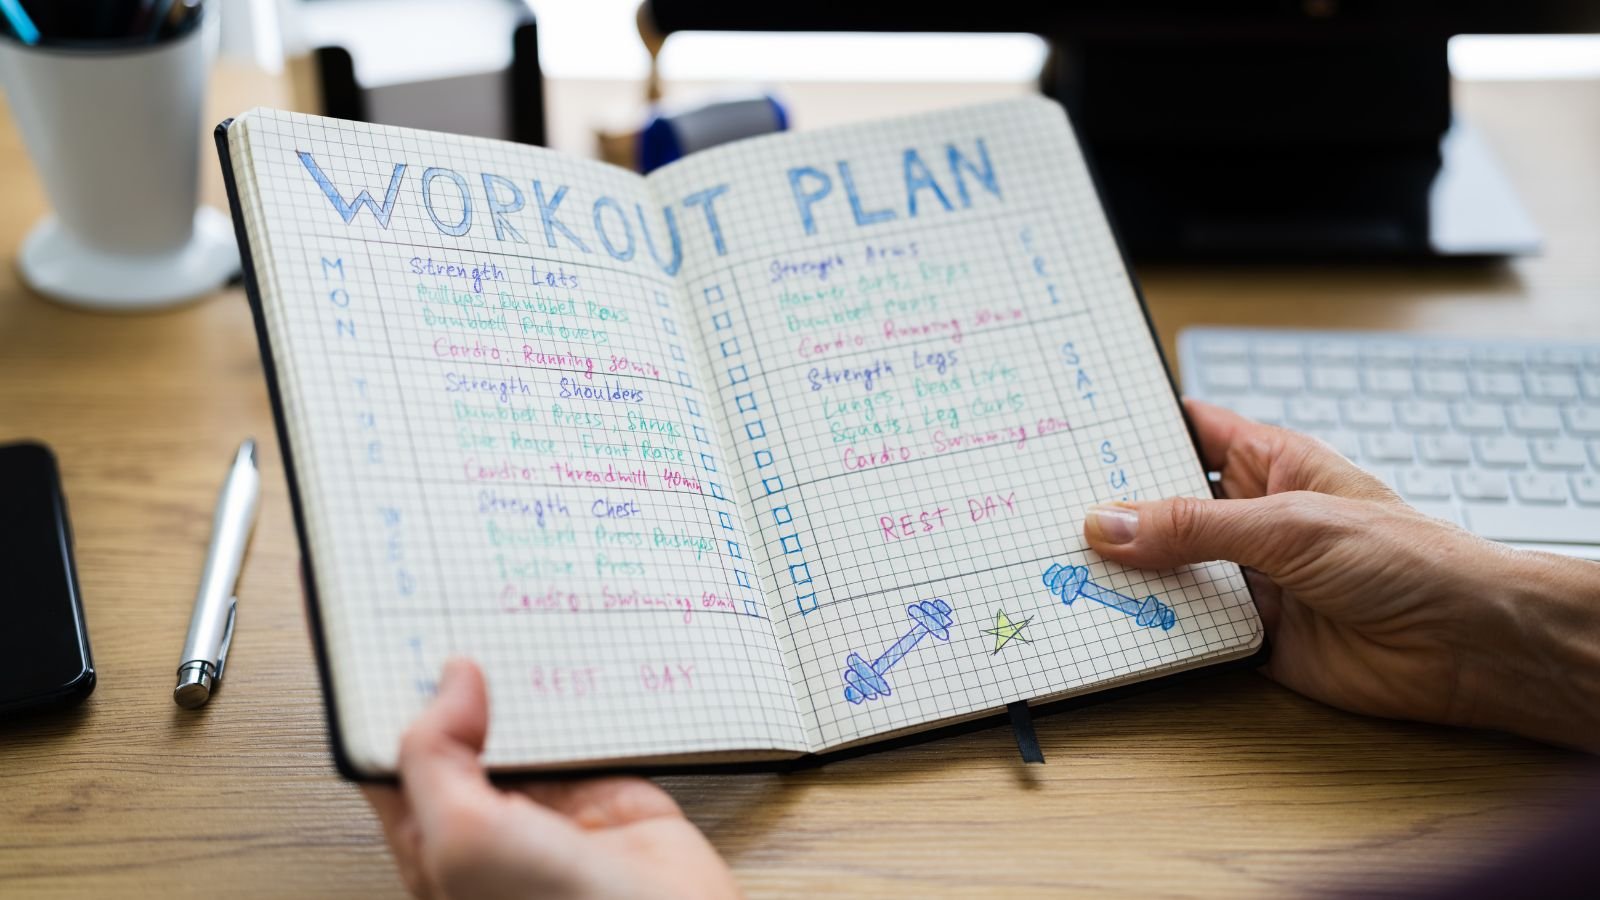 Set Realistic Goals For CONSISTENT WORKOUT ROUTINE